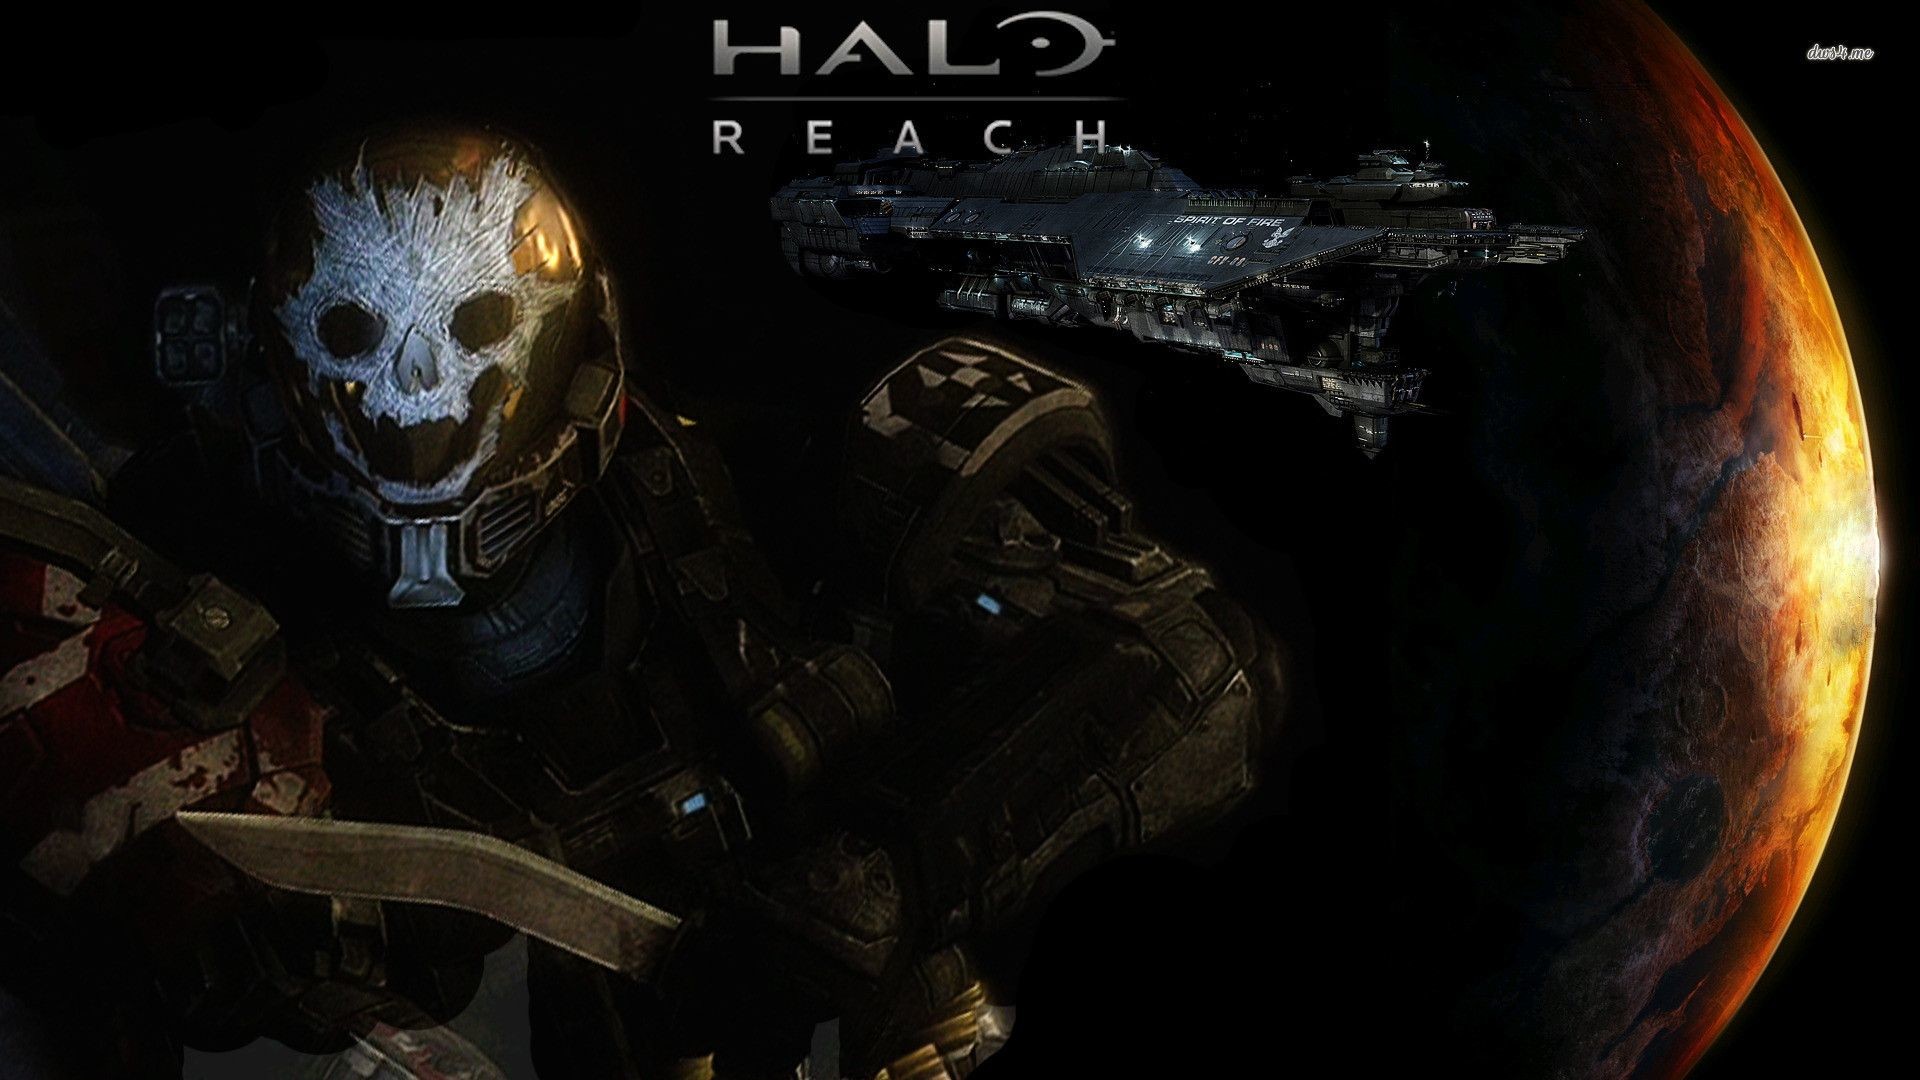 1920x1080 Halo Reach HD Wallpapers (55 Wallpapers)